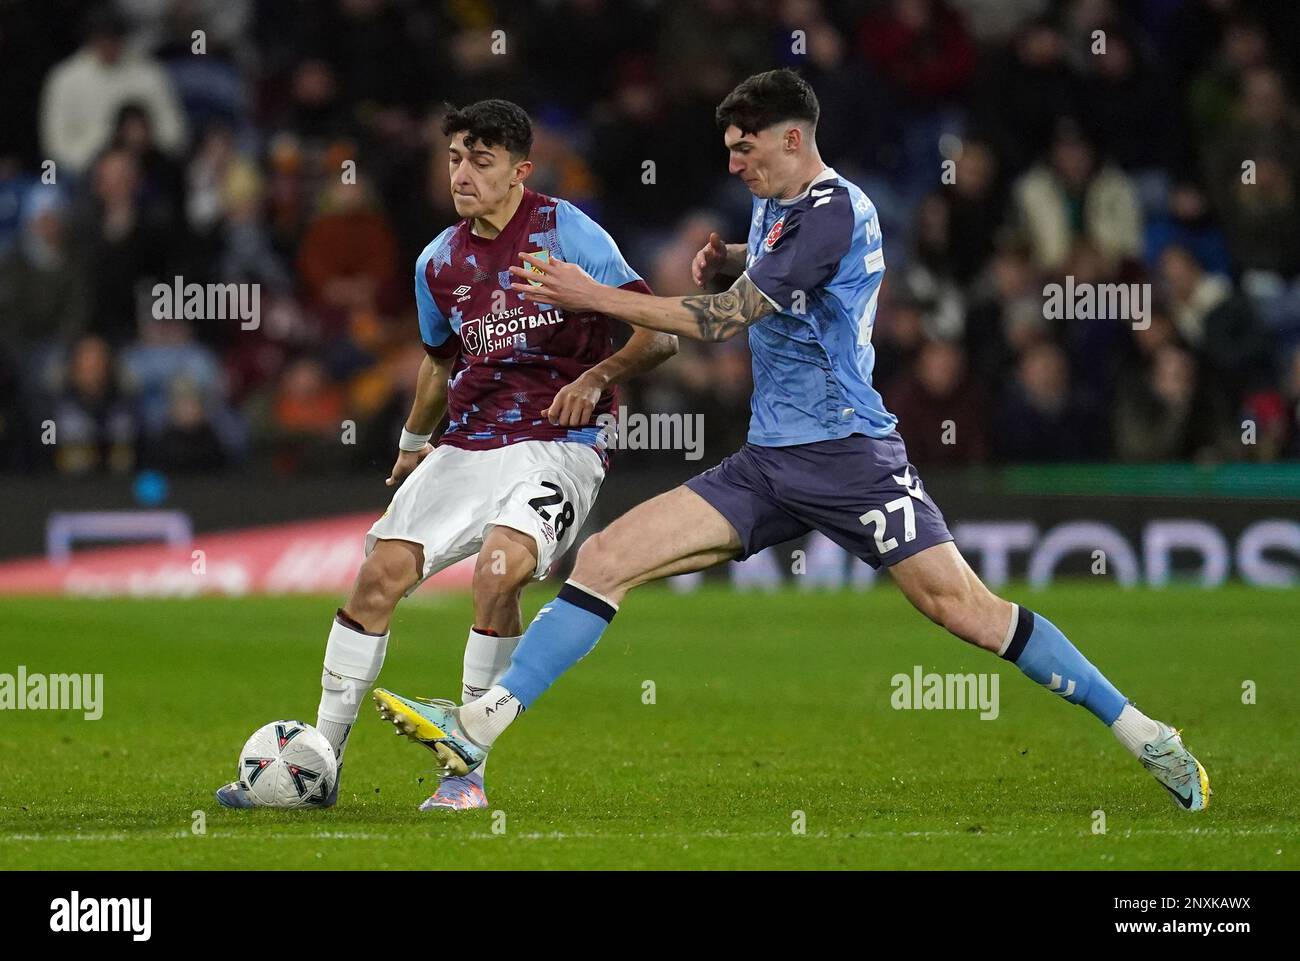 Burnley's Ameen Al-Dakhil (left) and Fleetwood Town's Harvey Macadam battle for the ball during the Emirates FA Cup fifth round match at Turf Moor, Burnley. Picture date: Wednesday March 1, 2023. Stock Photo